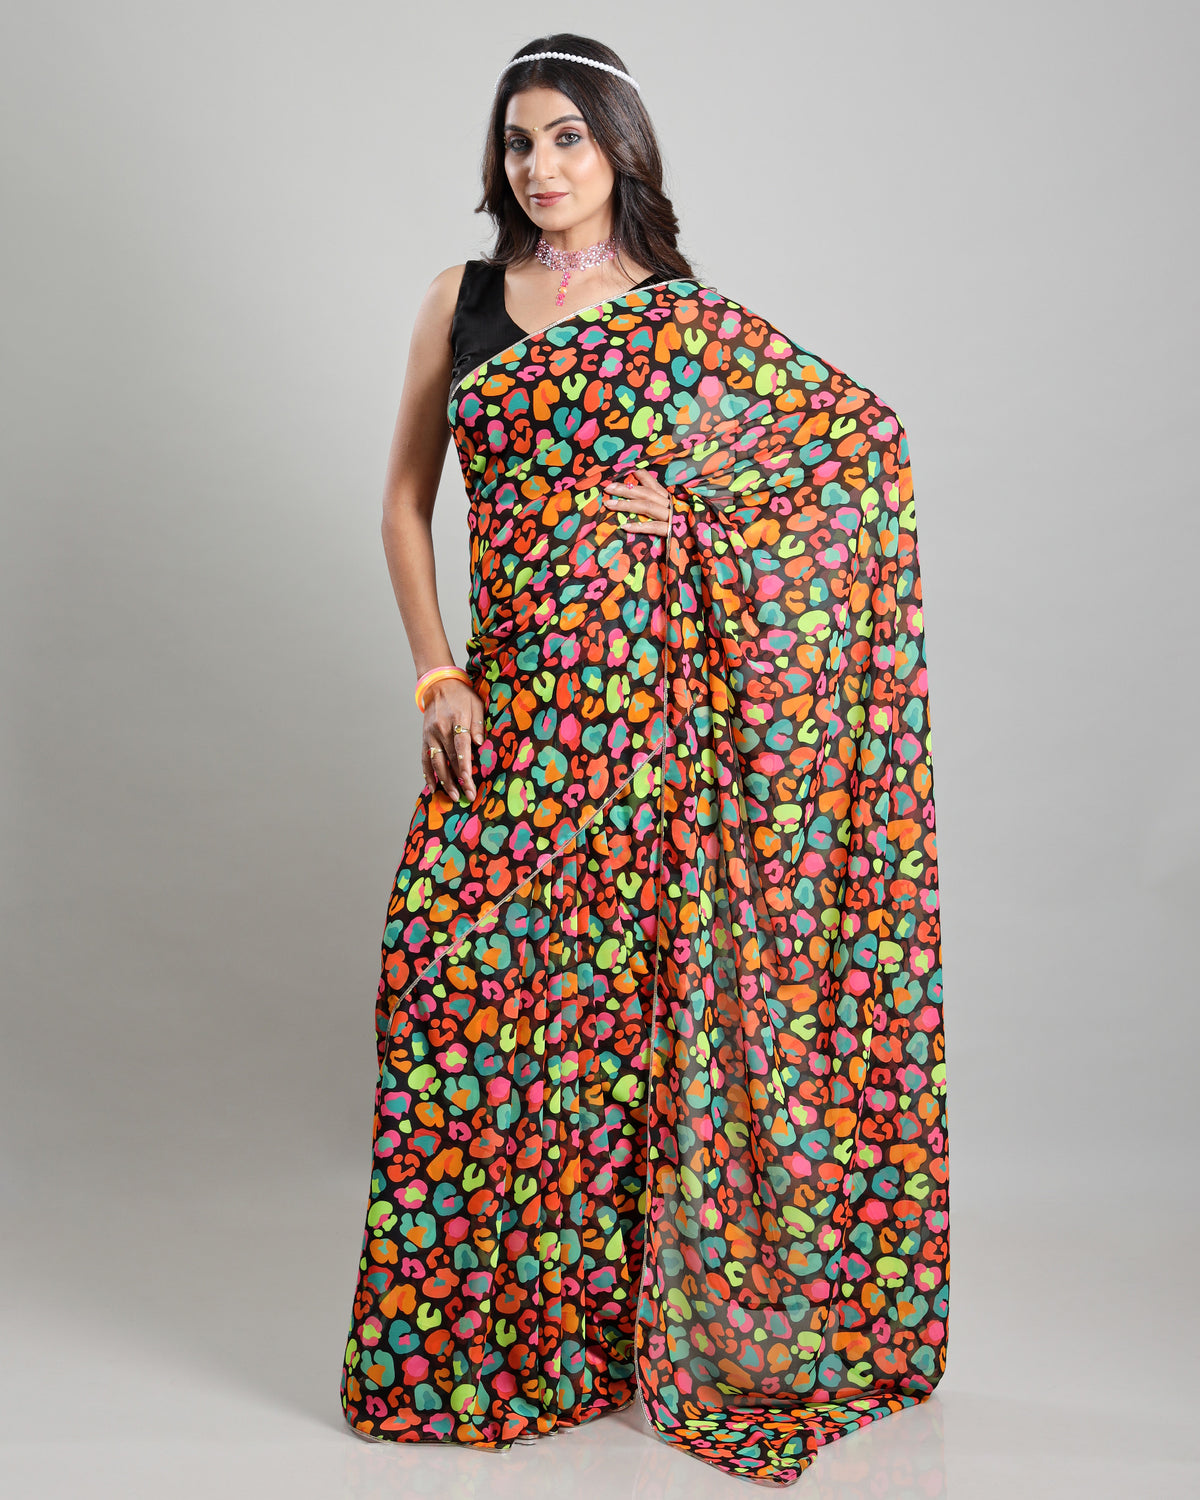 Beyond Tradition: The Neon Abstract Georgette Saree